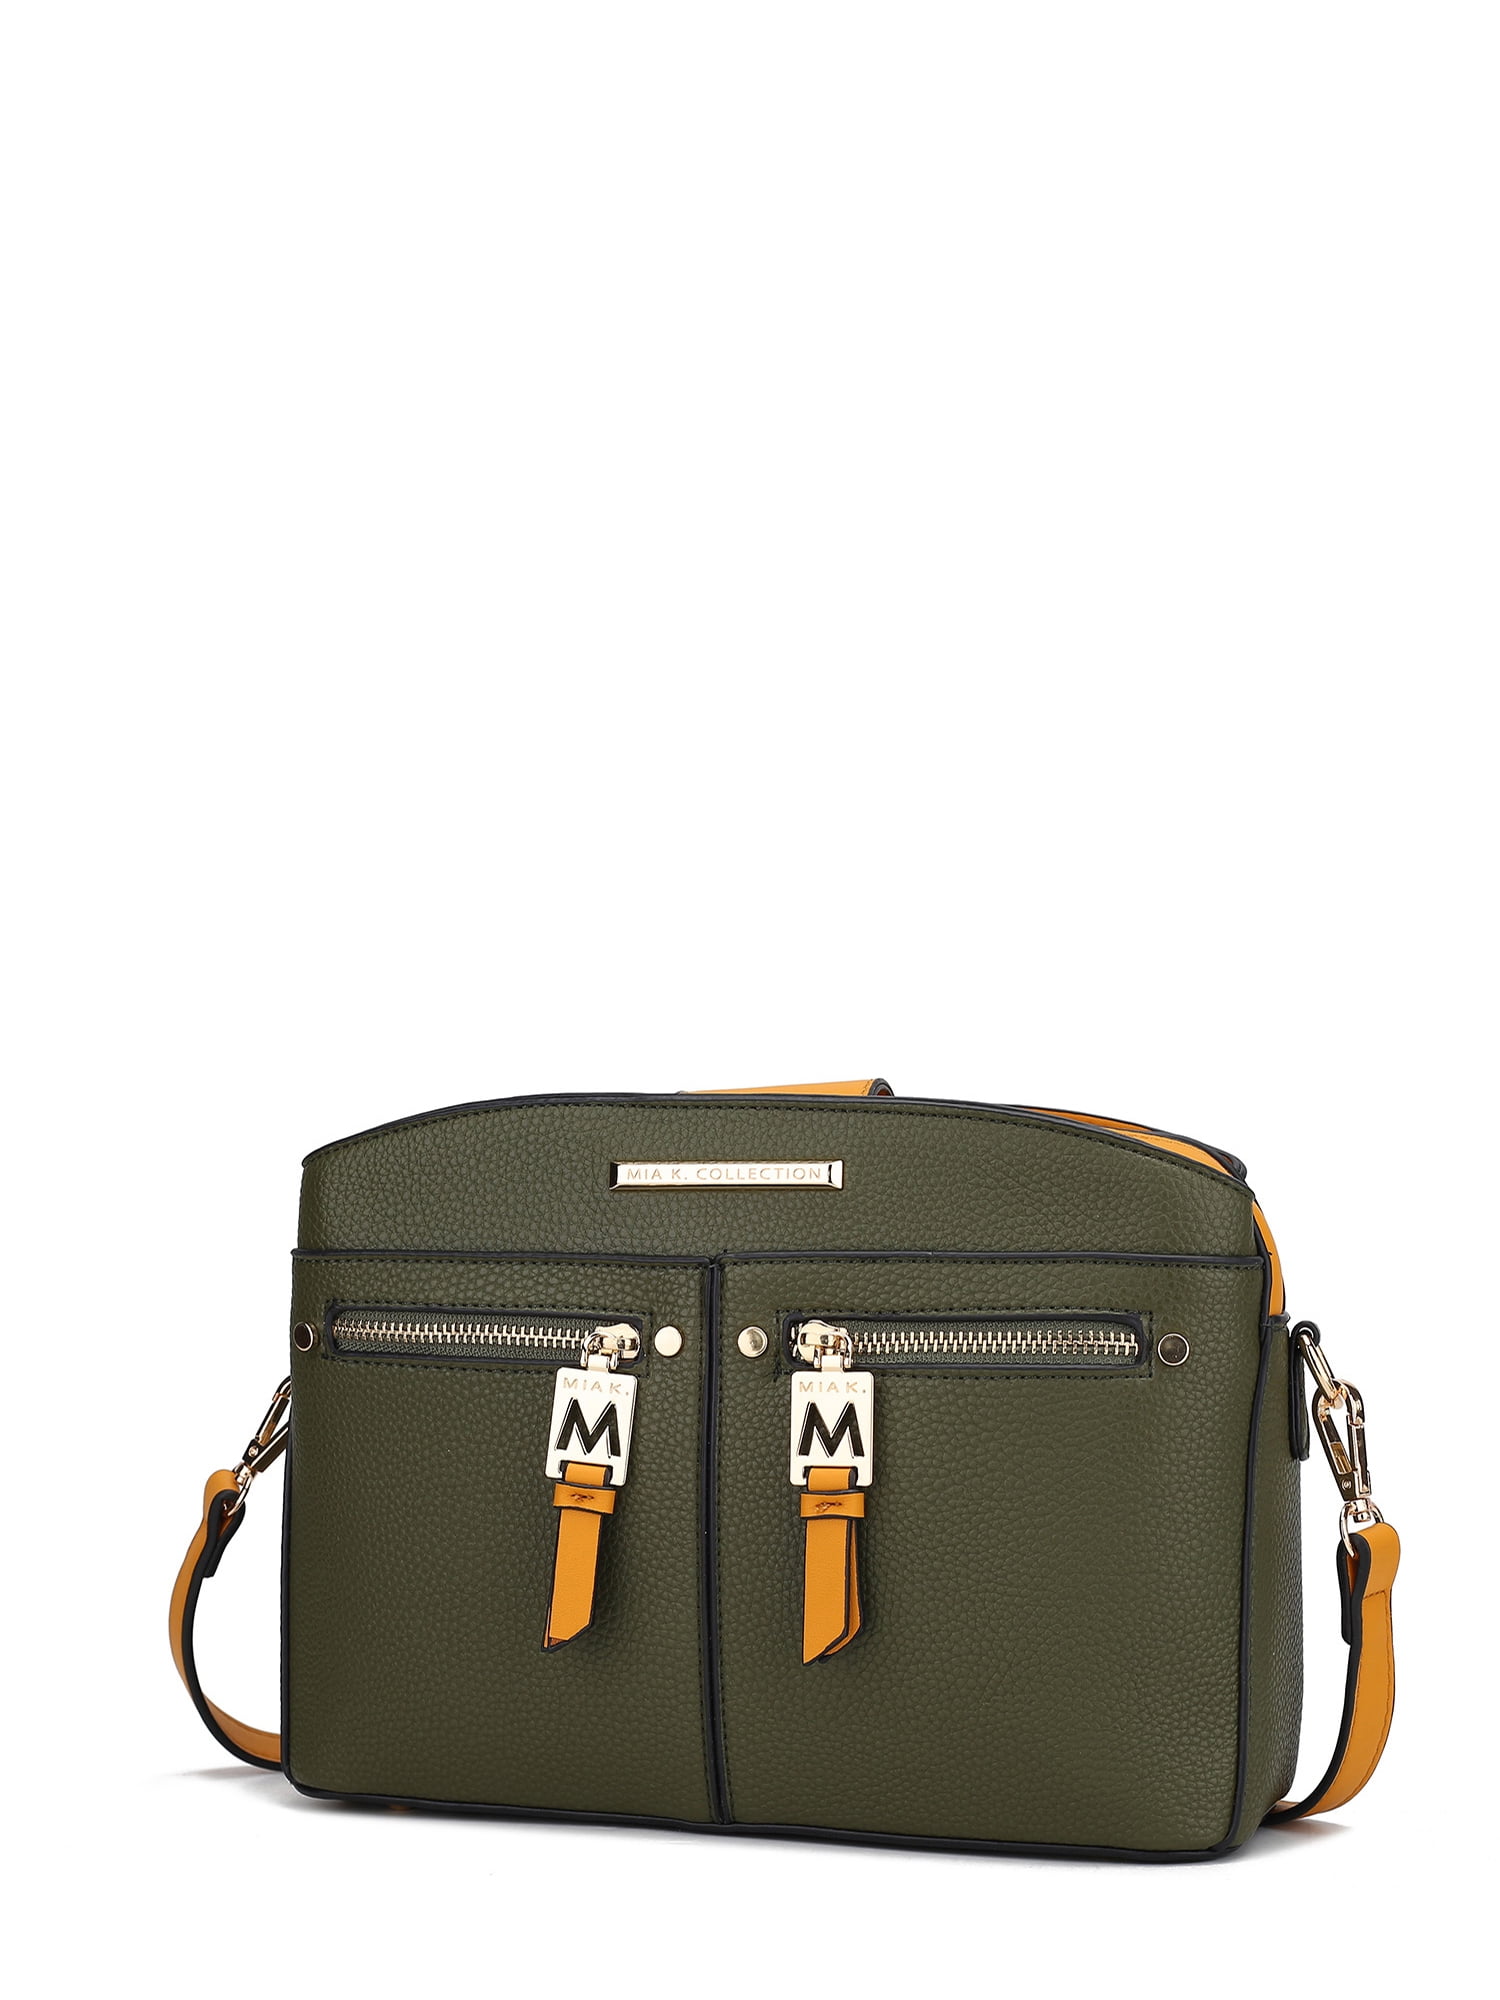 Faux Leather Multi Compartment Crossbody Bag - Mustard